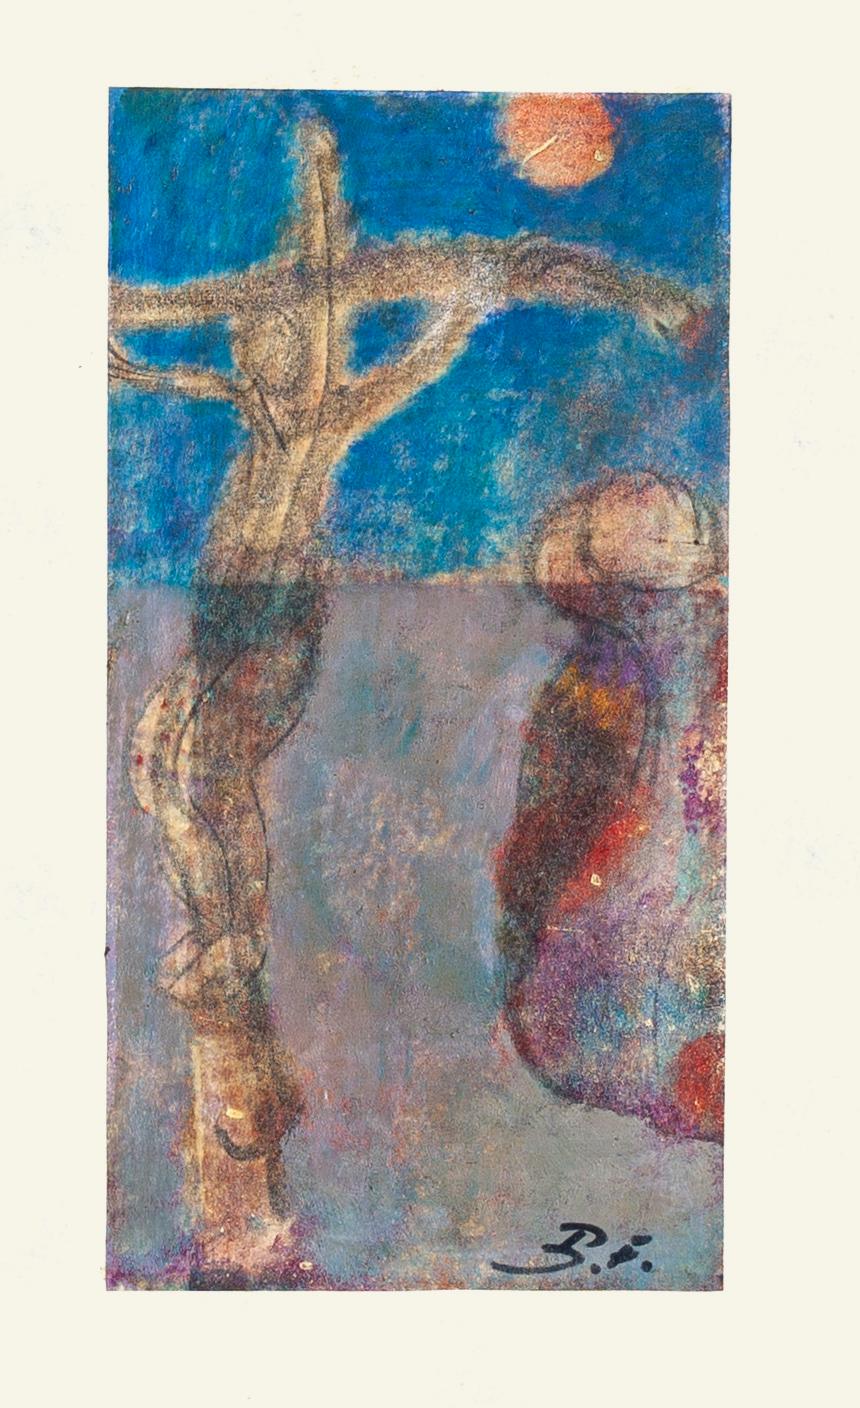 Crucifixion - Mixed Media - 20th Century - Art by Lise Fleuroy